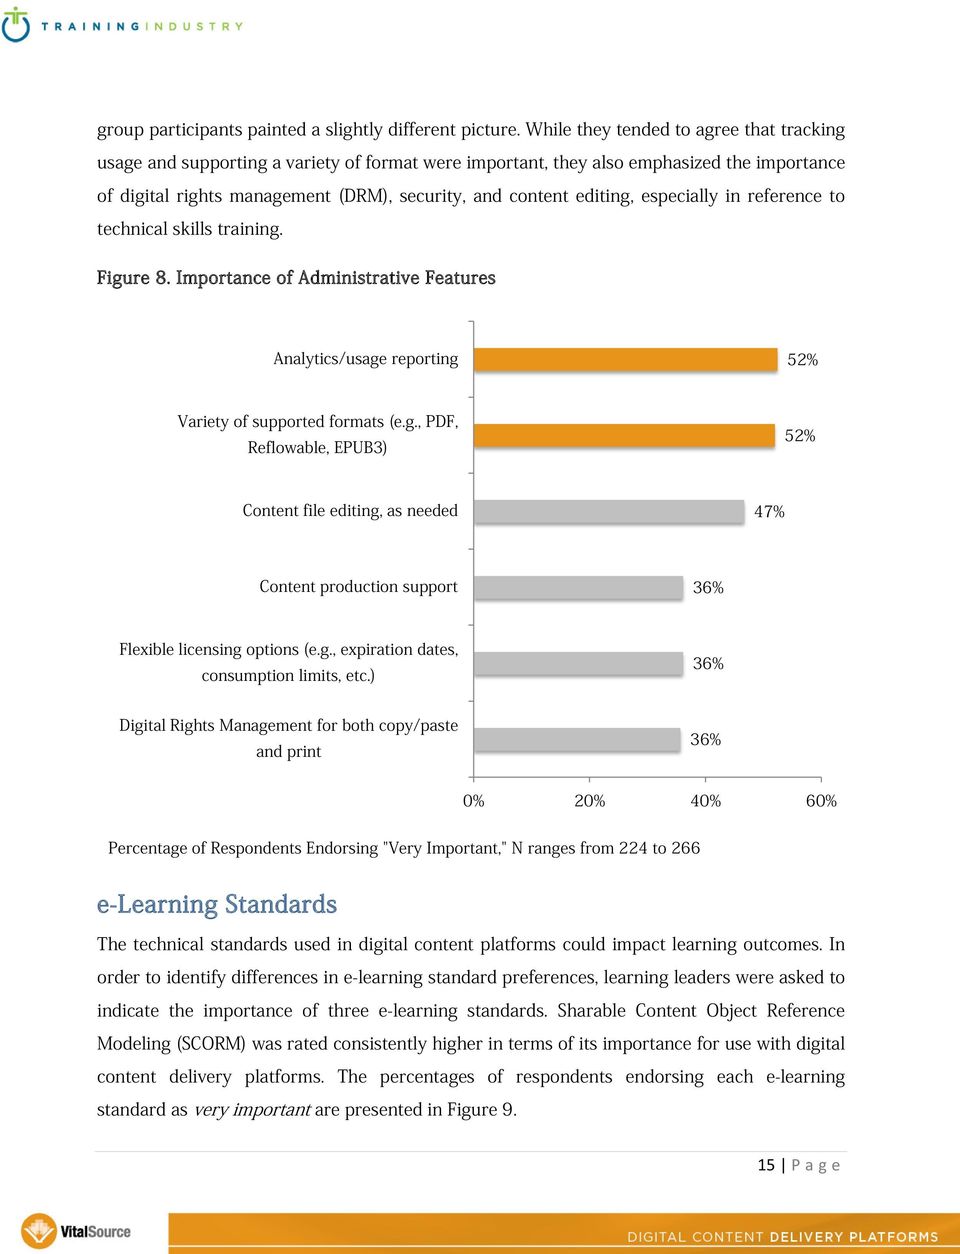 editing, especially in reference to technical skills training. Figure 8. Importance of Administrative Features Analytics/usage reporting 52% Variety of supported formats (e.g., PDF, Reflowable, EPUB3) 52% Content file editing, as needed 47% Content production support 36% Flexible licensing options (e.